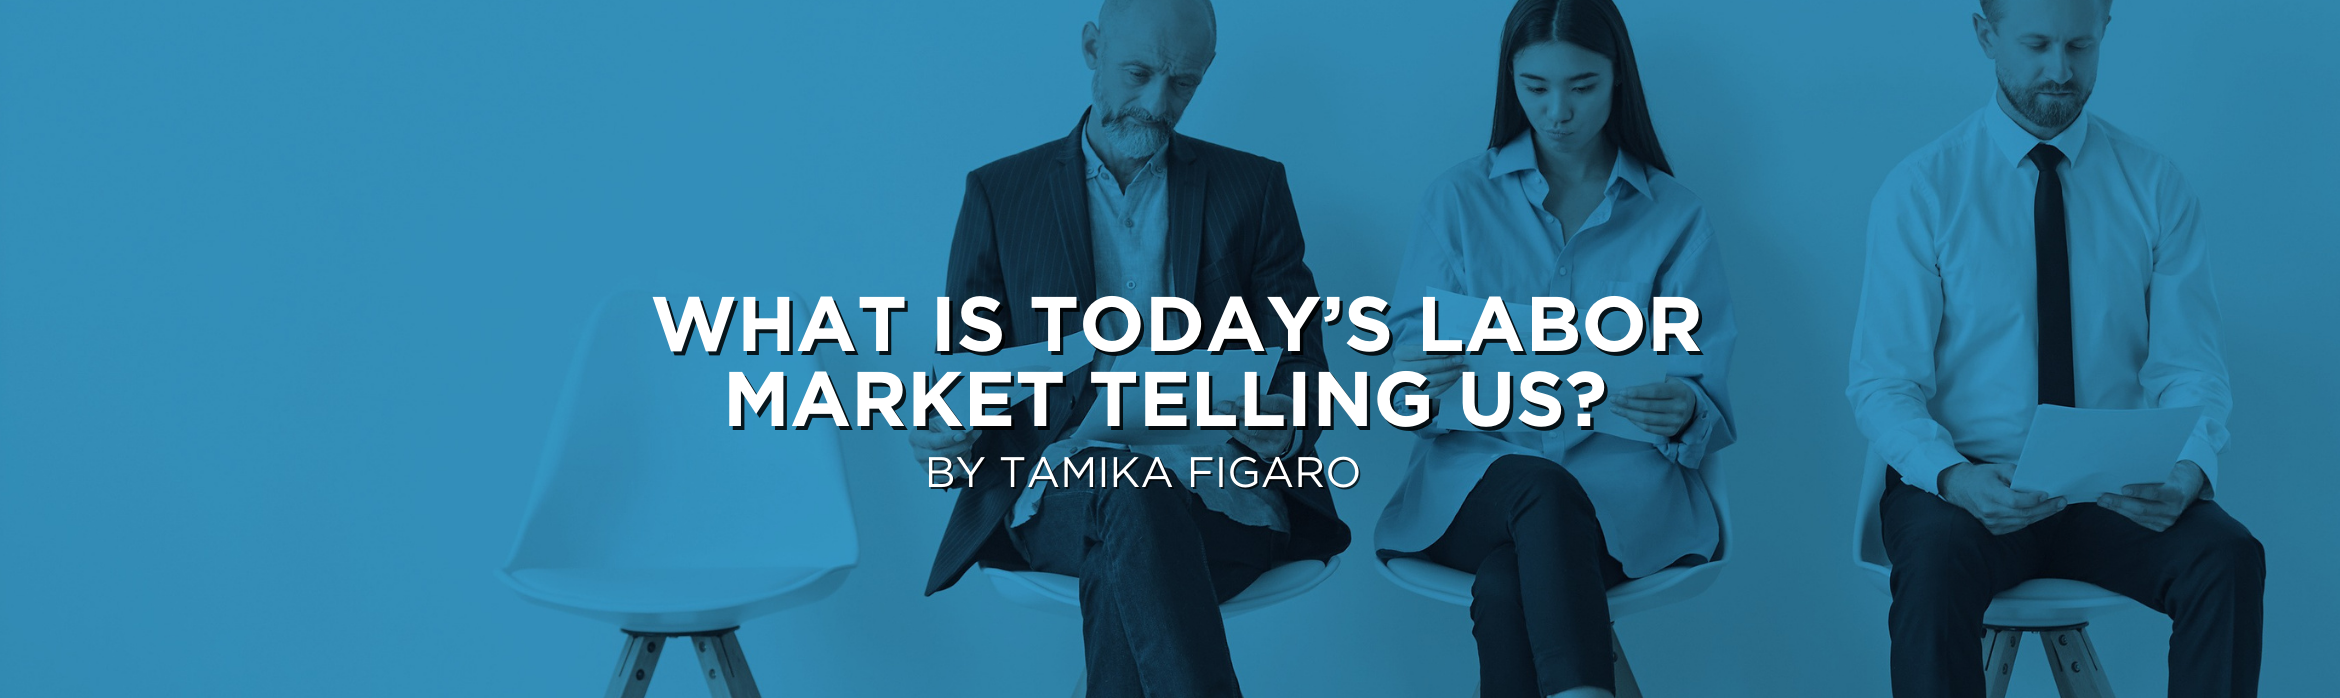 What is Today’s Labor Market Telling Us?